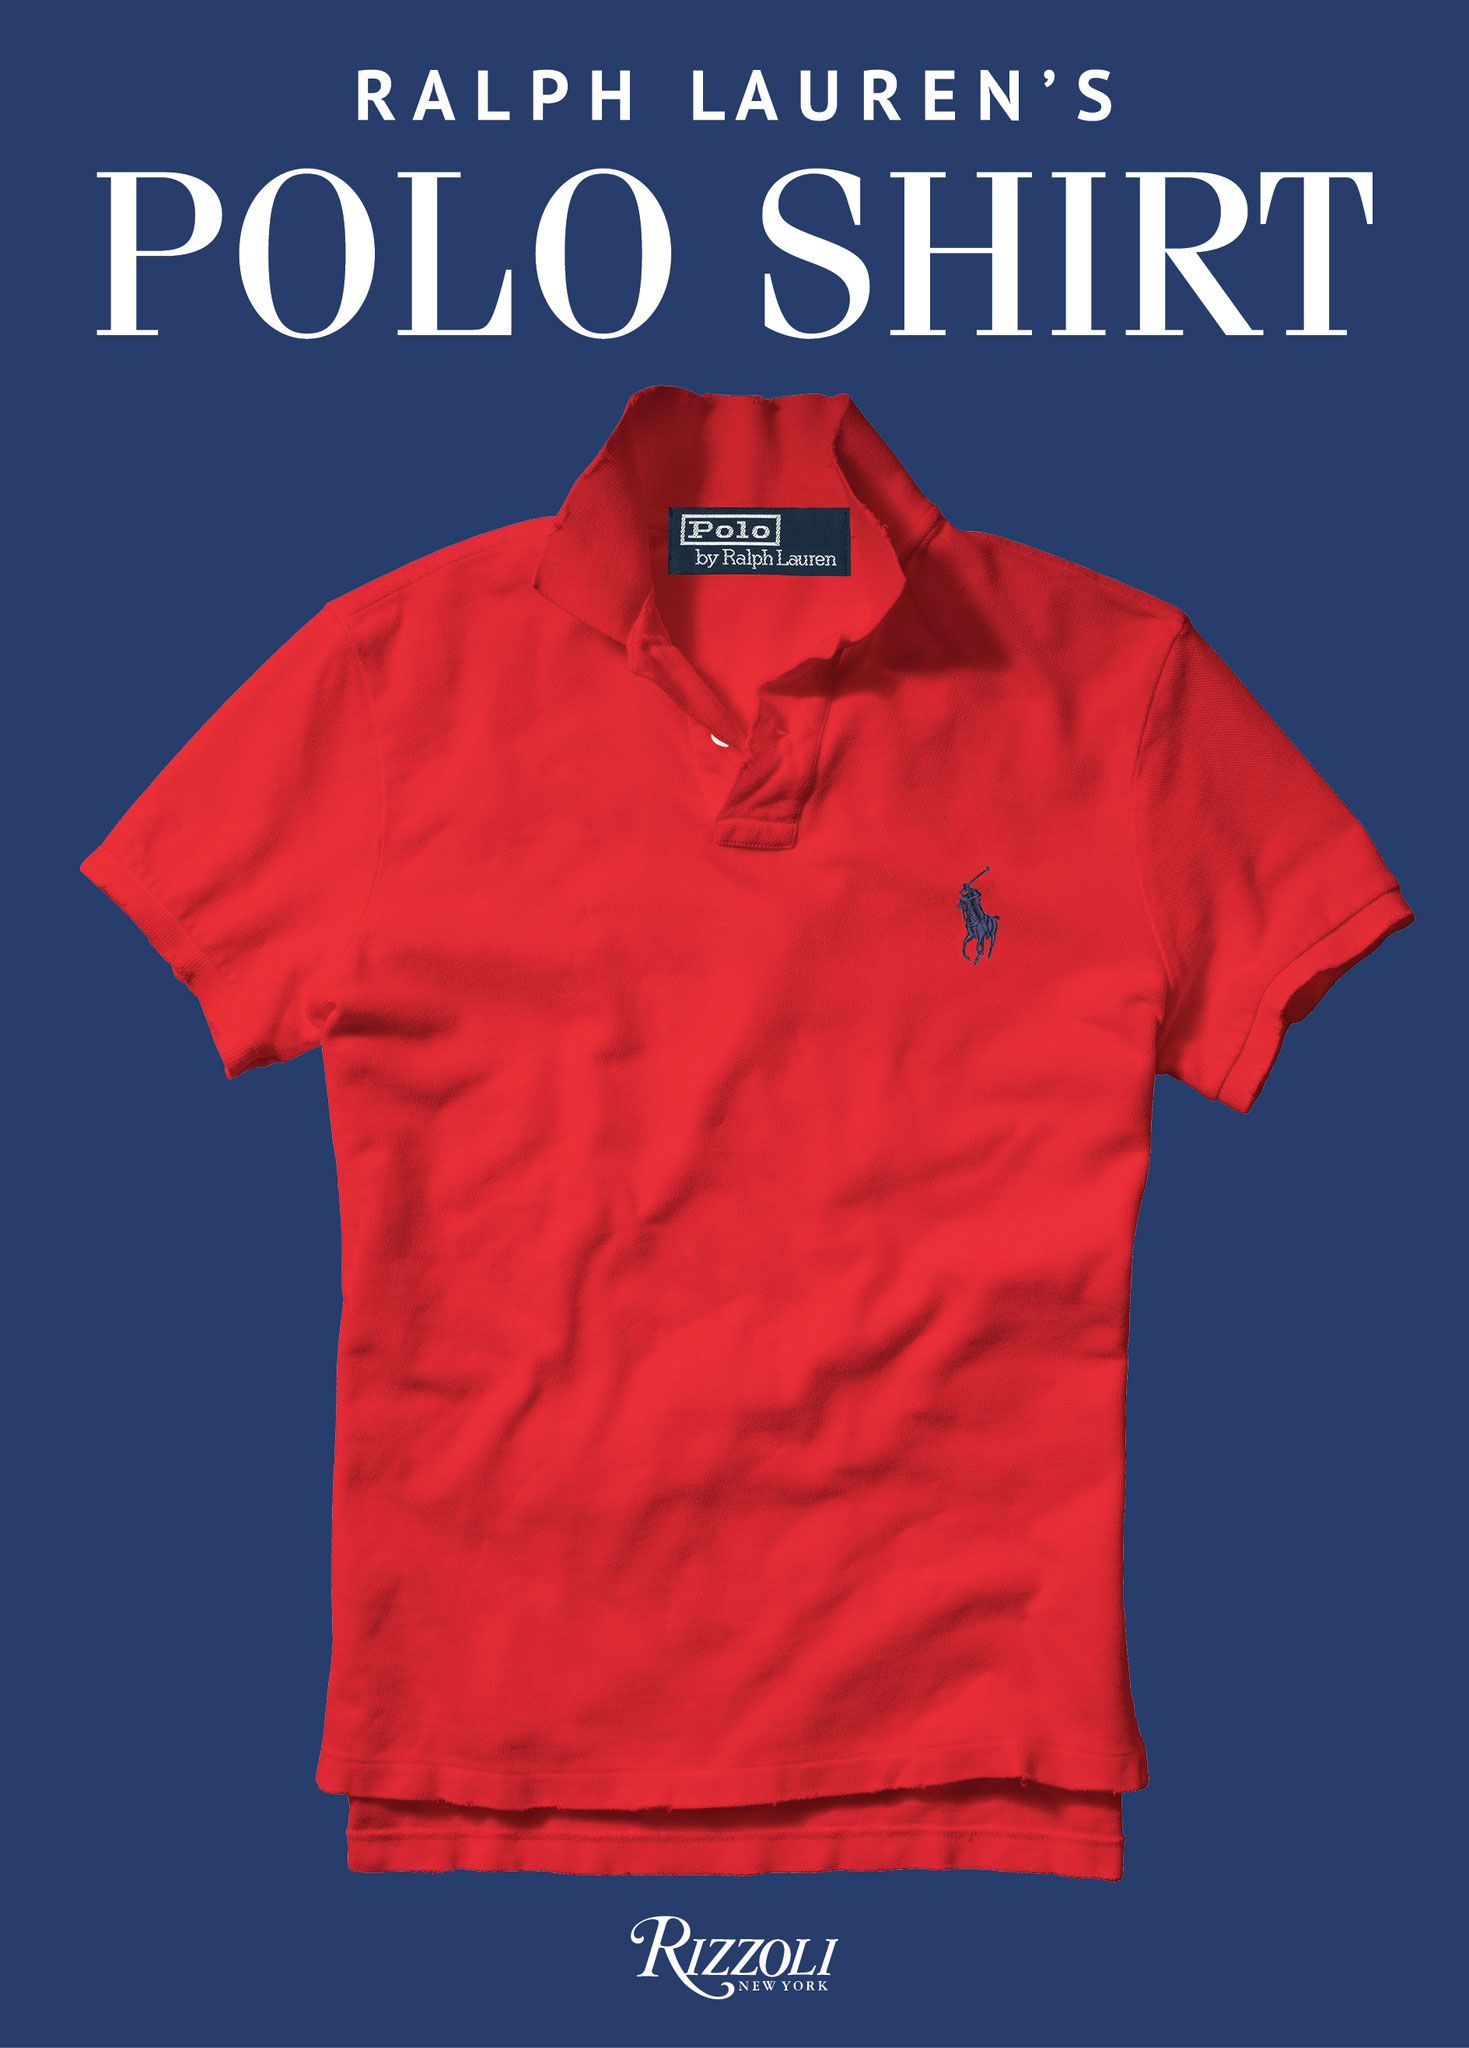 Ralph Lauren celebrates its greatest icon, the polo shirt, in a stunning  new book